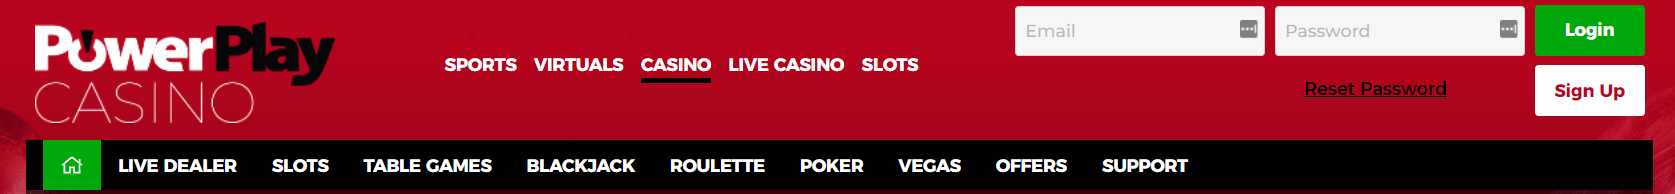 Join PowerPlay Casino and play games